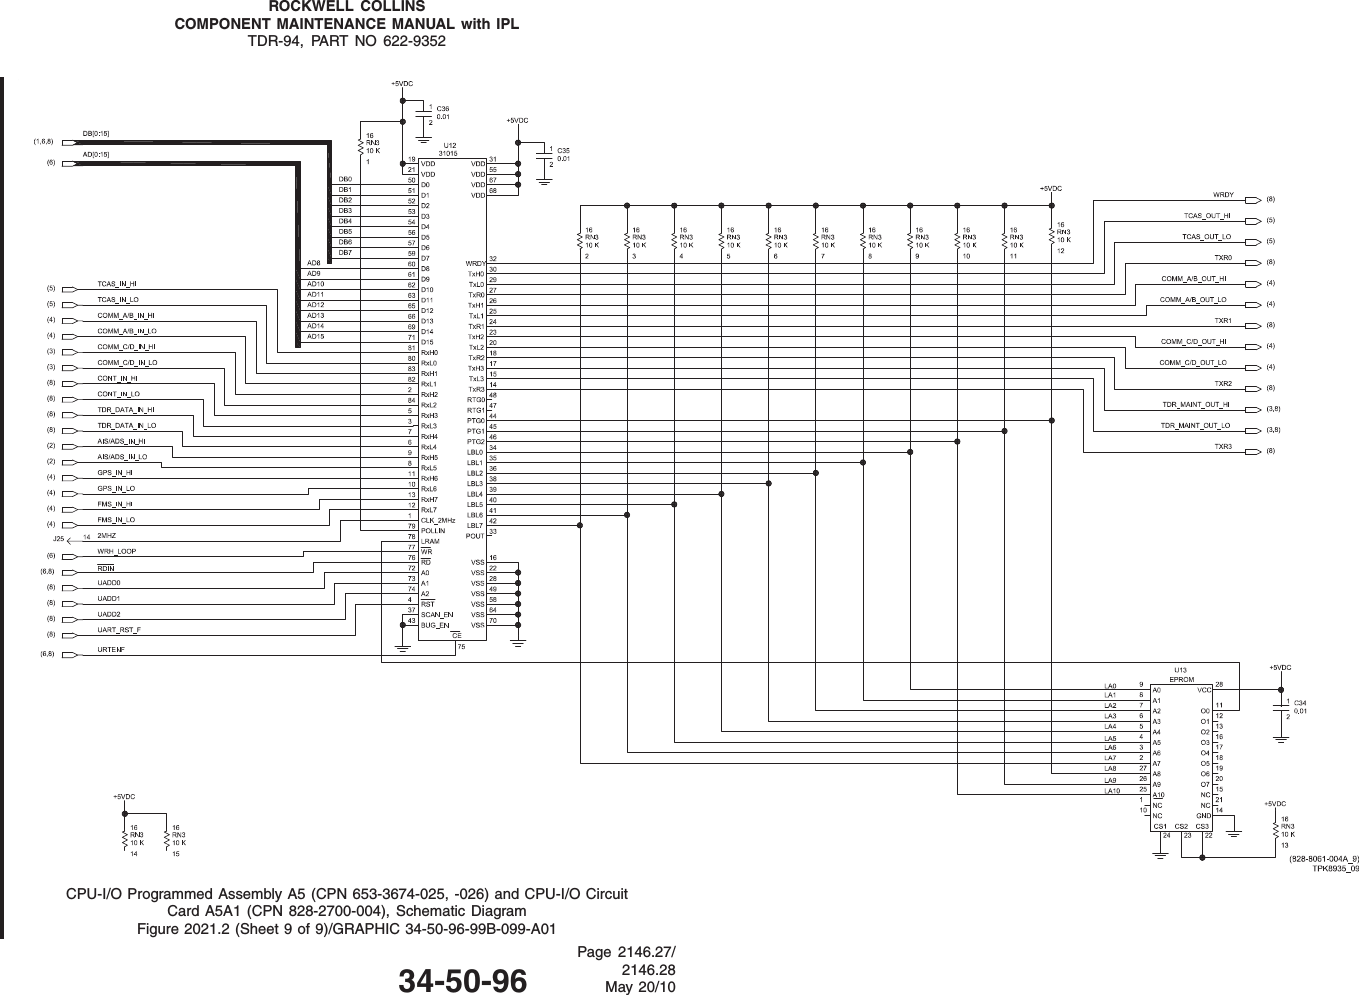 ROCKWELL COLLINSCOMPONENT MAINTENANCE MANUAL with IPLTDR-94, PART NO 622-9352CPU-I/O Programmed Assembly A5 (CPN 653-3674-025, -026) and CPU-I/O CircuitCard A5A1 (CPN 828-2700-004), Schematic DiagramFigure 2021.2 (Sheet 9 of 9)/GRAPHIC 34-50-96-99B-099-A0134-50-96Page 2146.27/2146.28May 20/10